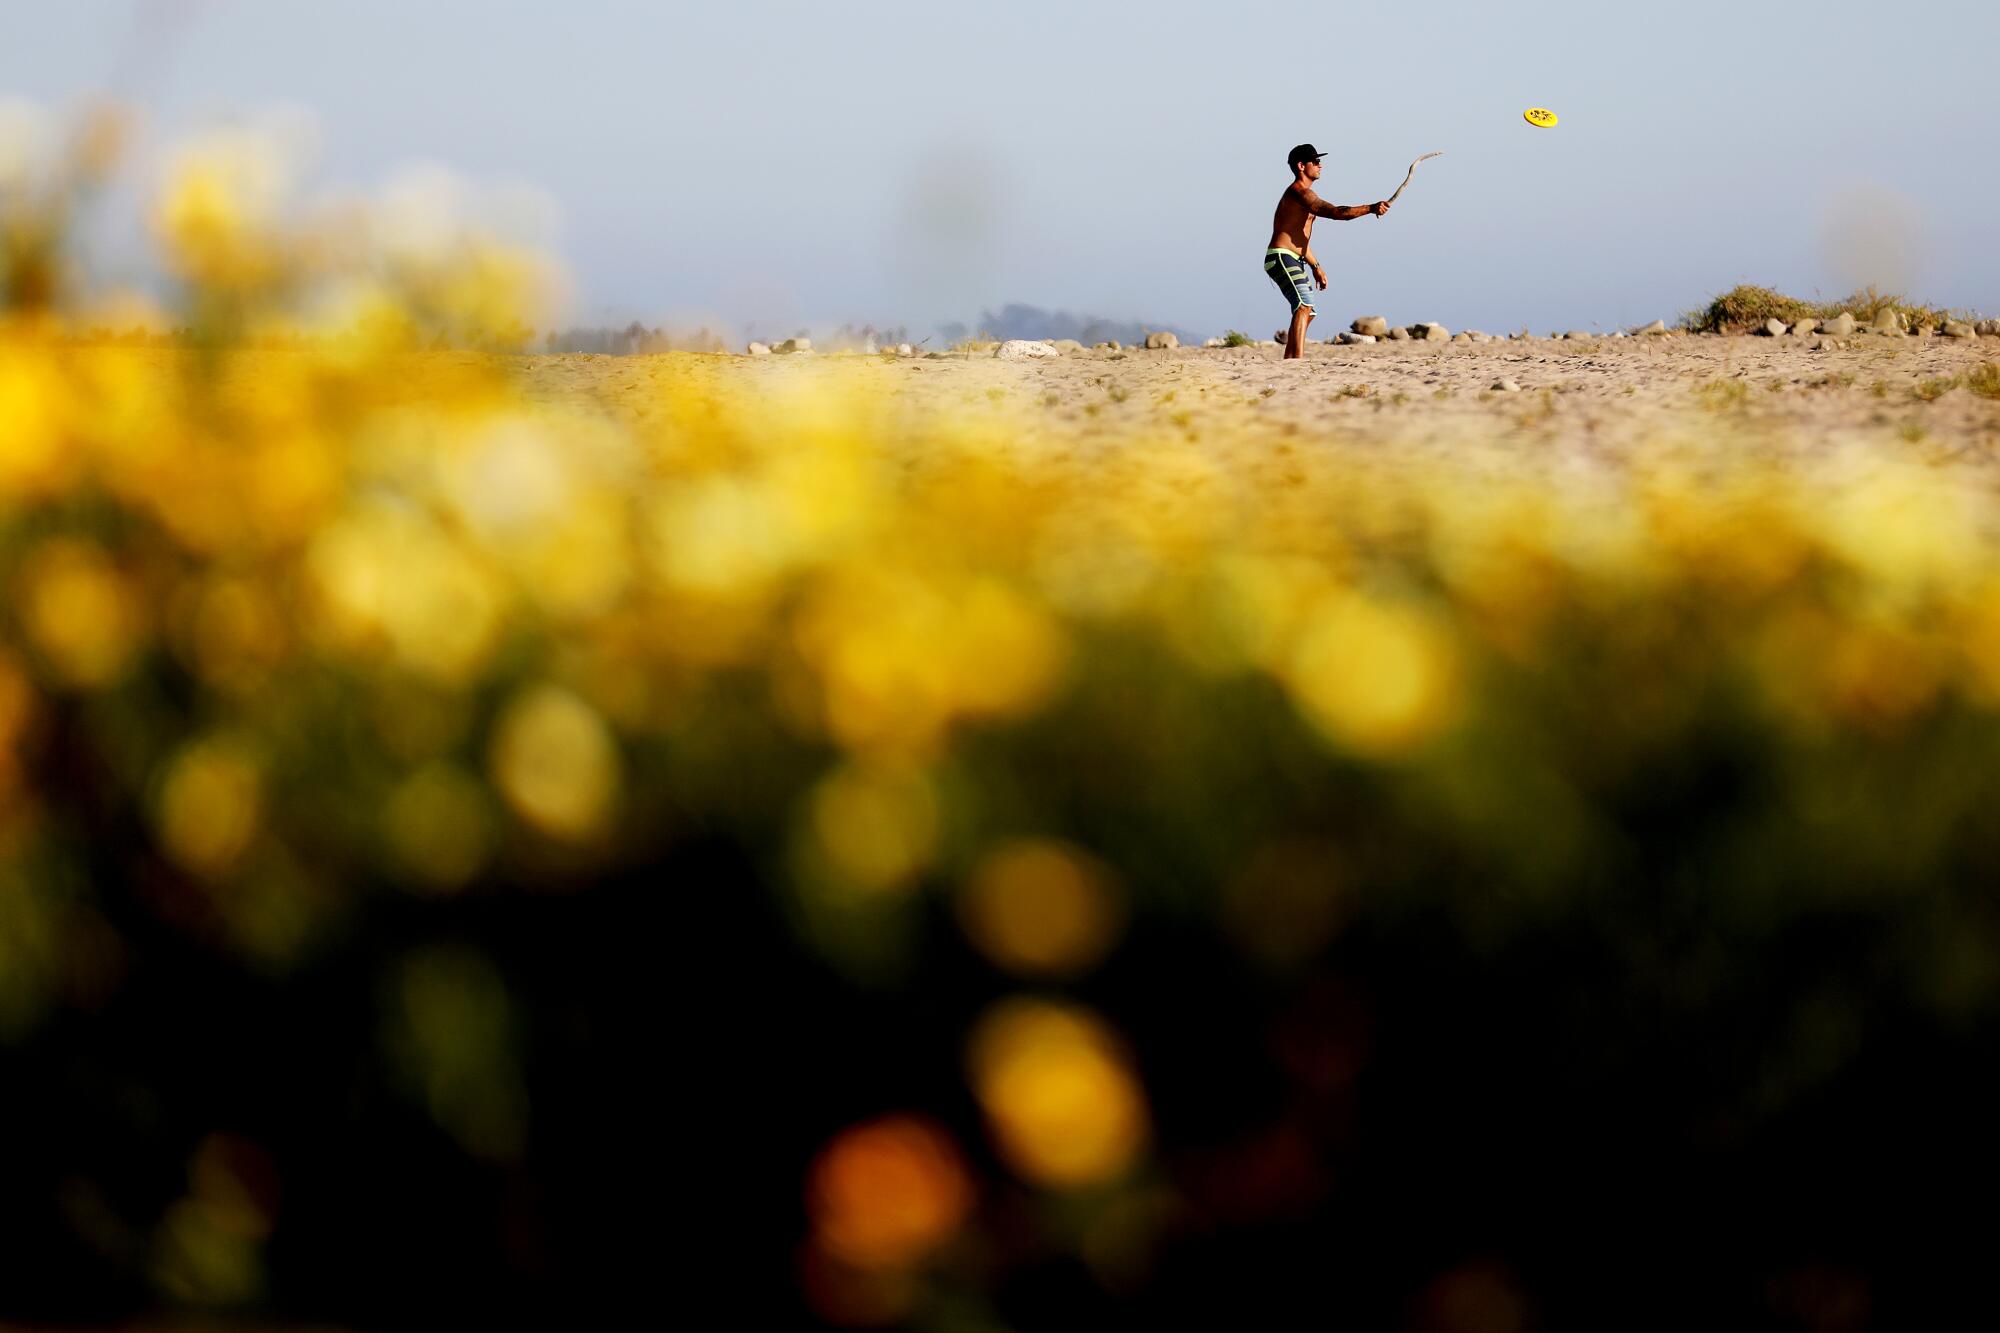 Brian Chapman of Santa Monica plays Frisbee at the beach in Ventura. "We came up for the beach because all of the beaches in Los Angeles are closed," said Chapman.